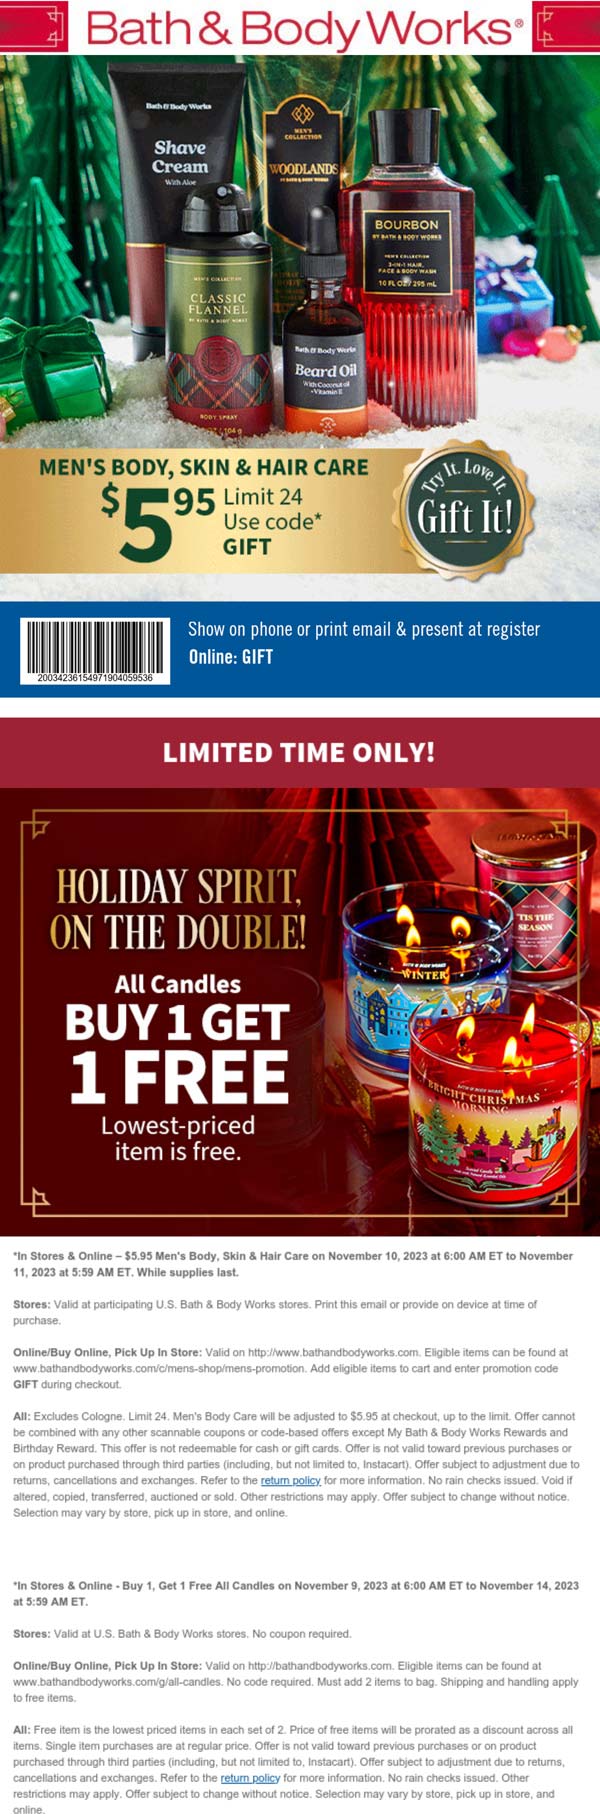 Bath & Body Works stores Coupon  $6 mens body care today at Bath & Body Works, or online via promo code GIFT #bathbodyworks 